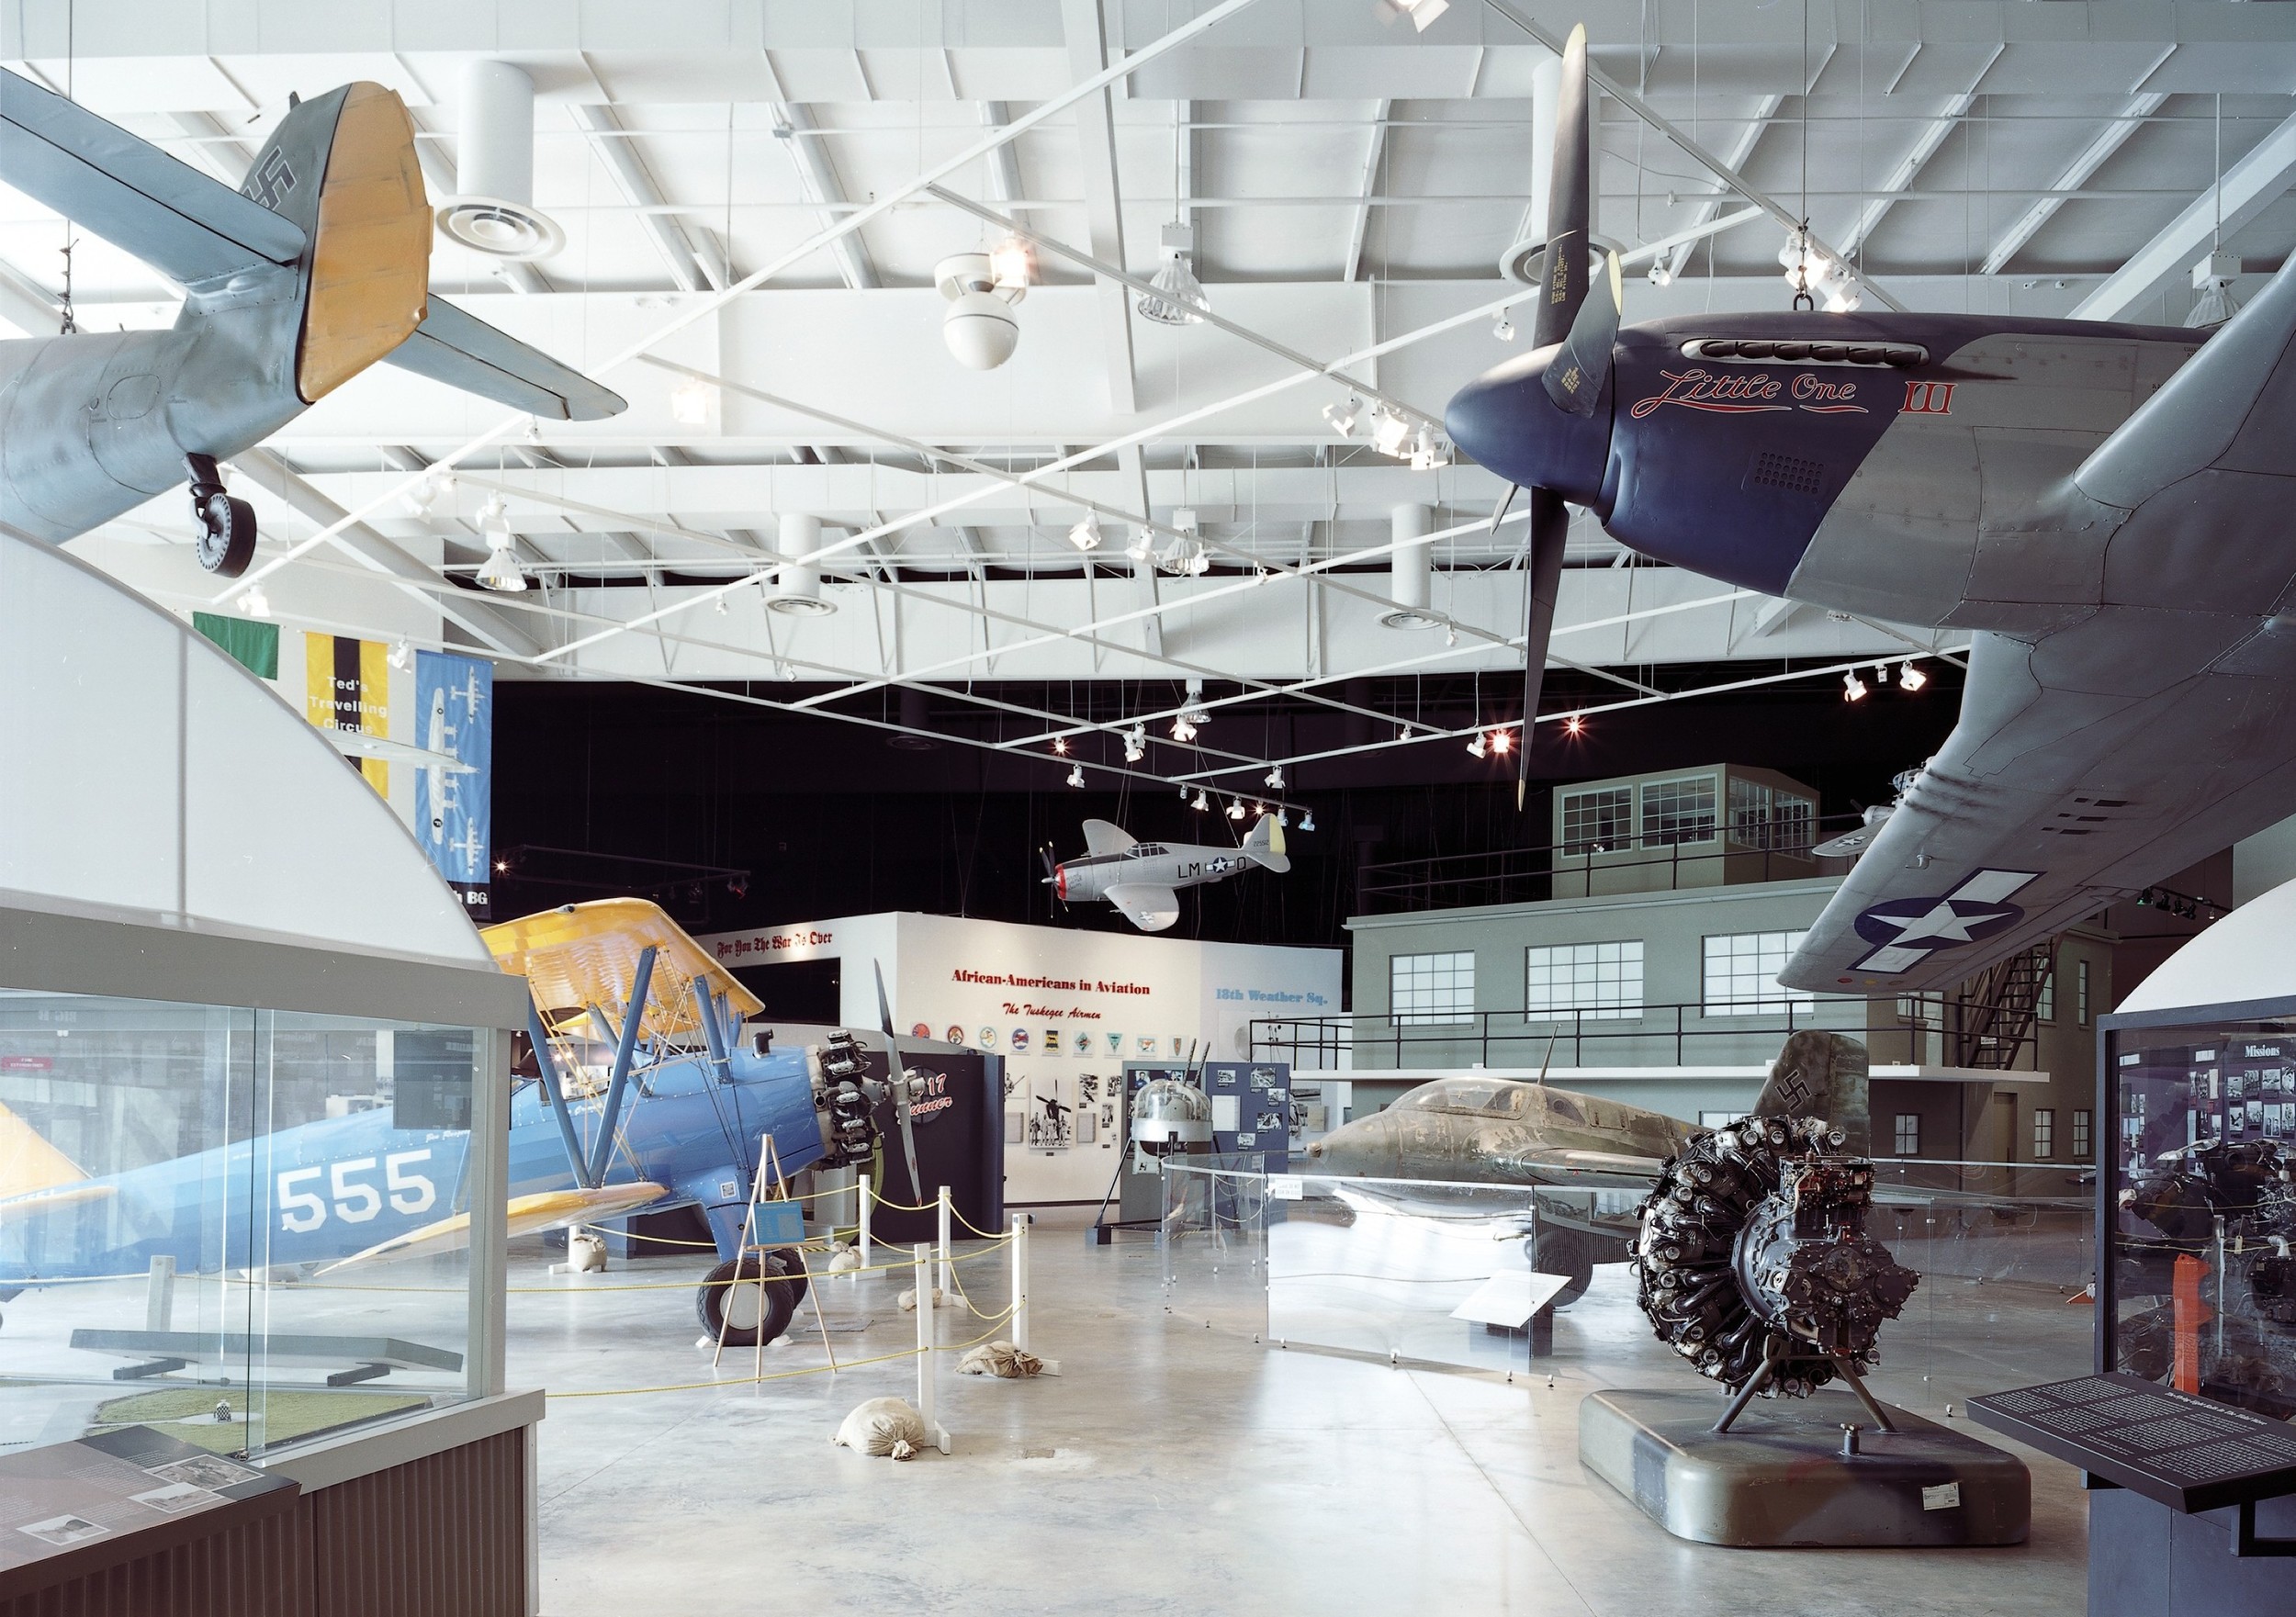 8th Air Force Museum